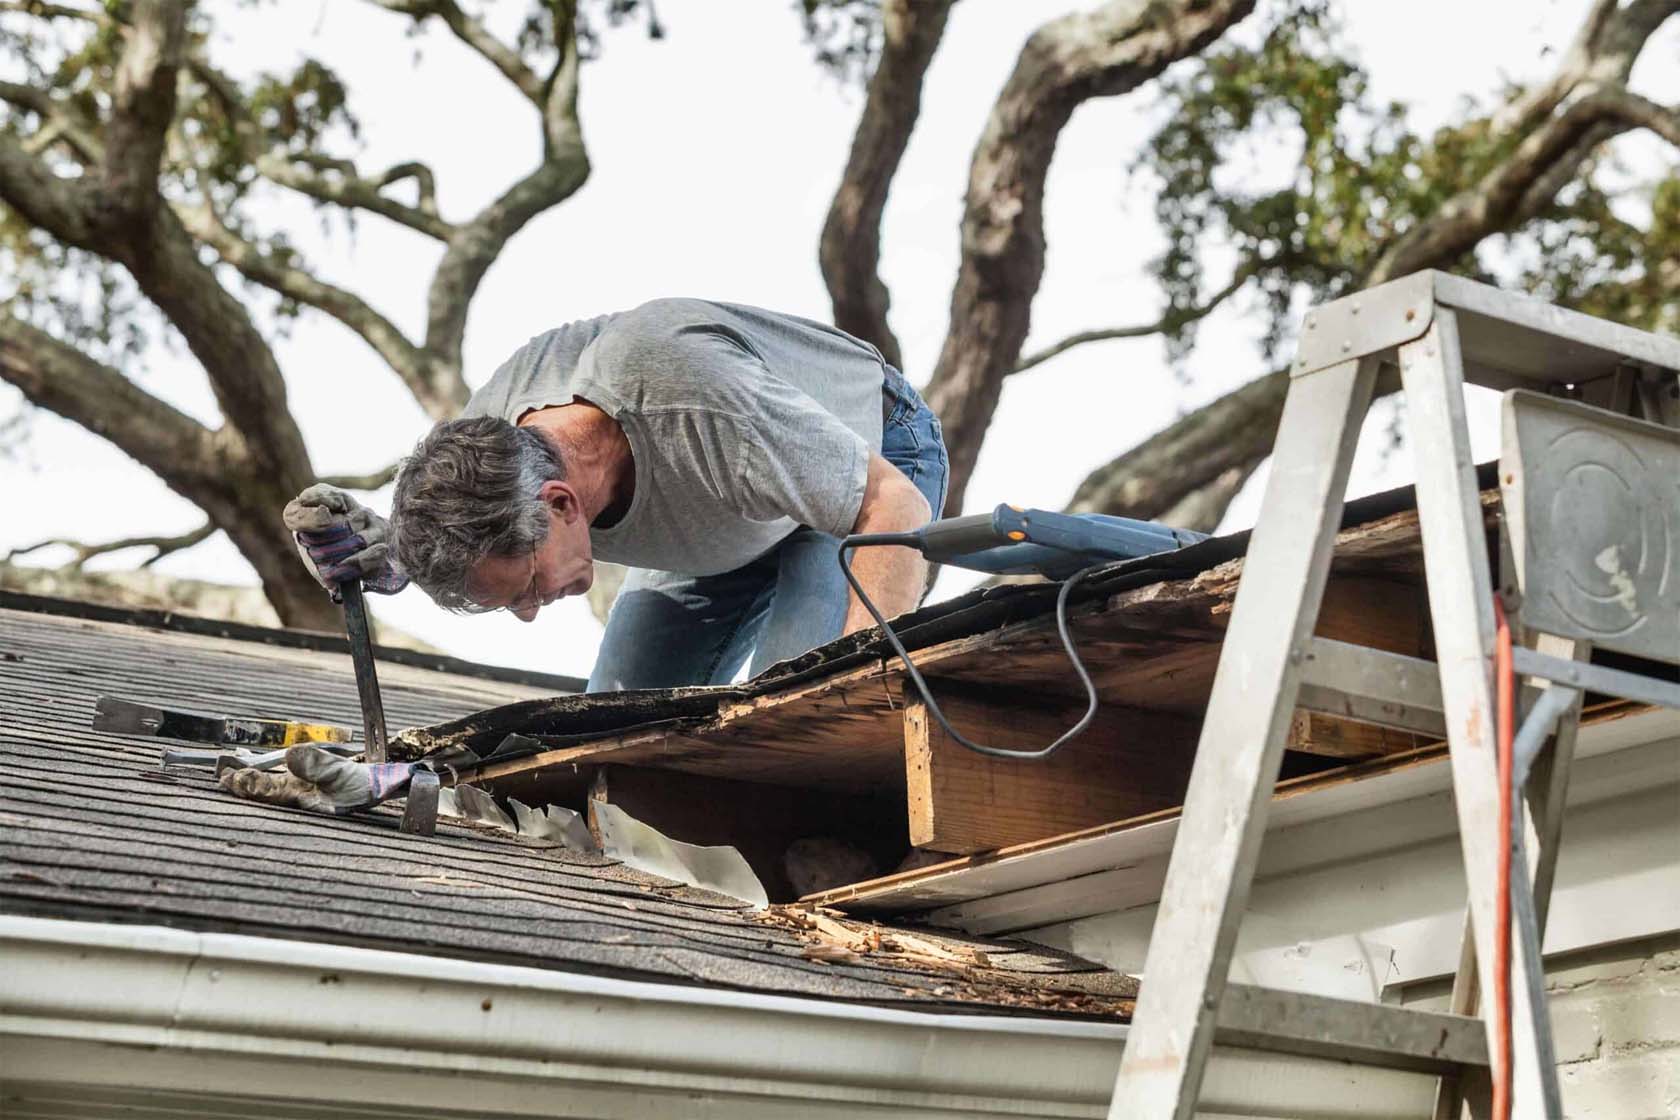 Common Causes Of Roof Damages